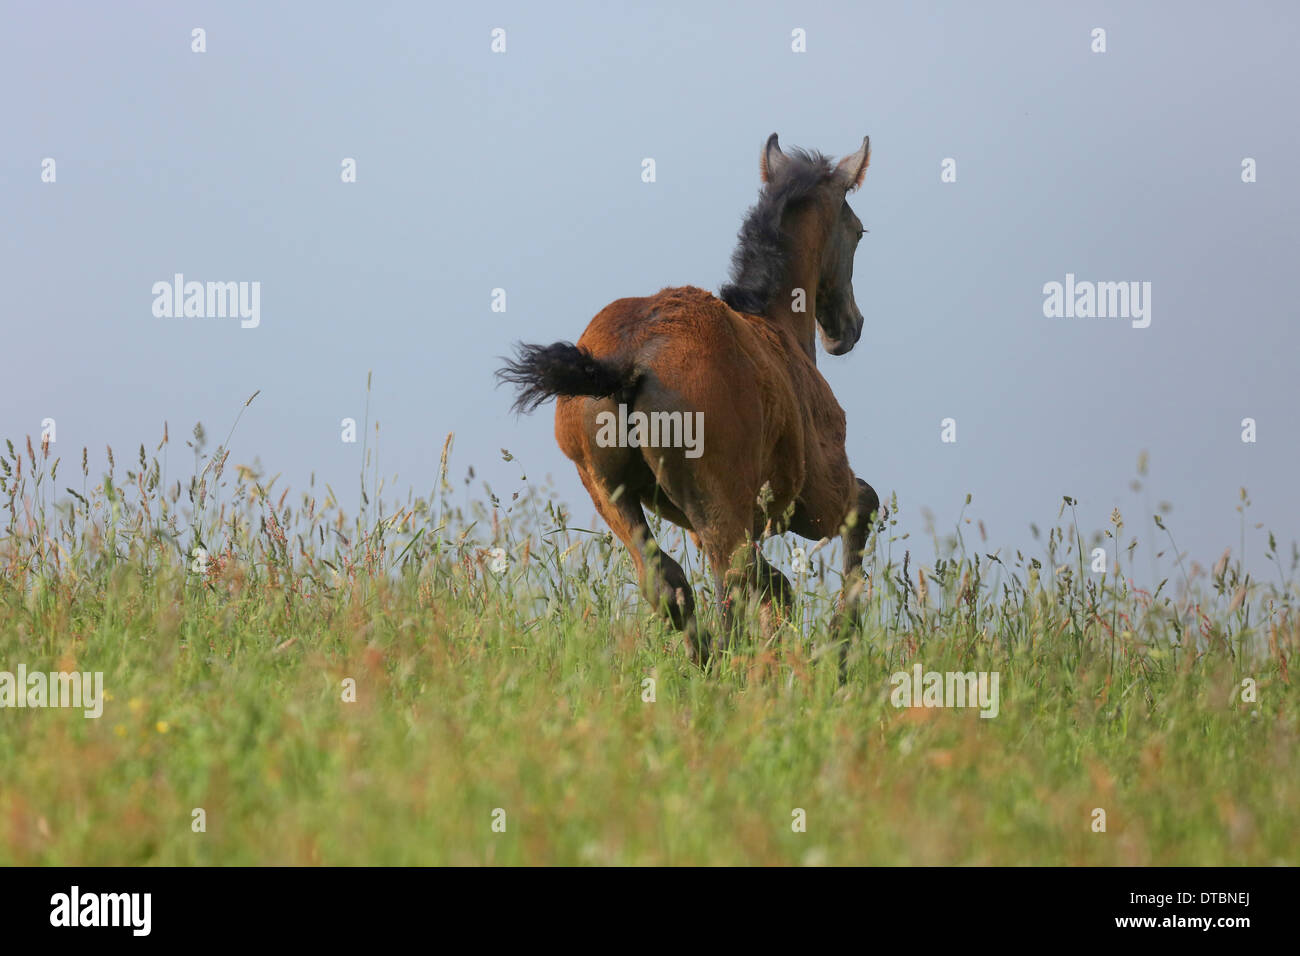 Foal galloping through the tall grass of a pasture Stock Photo